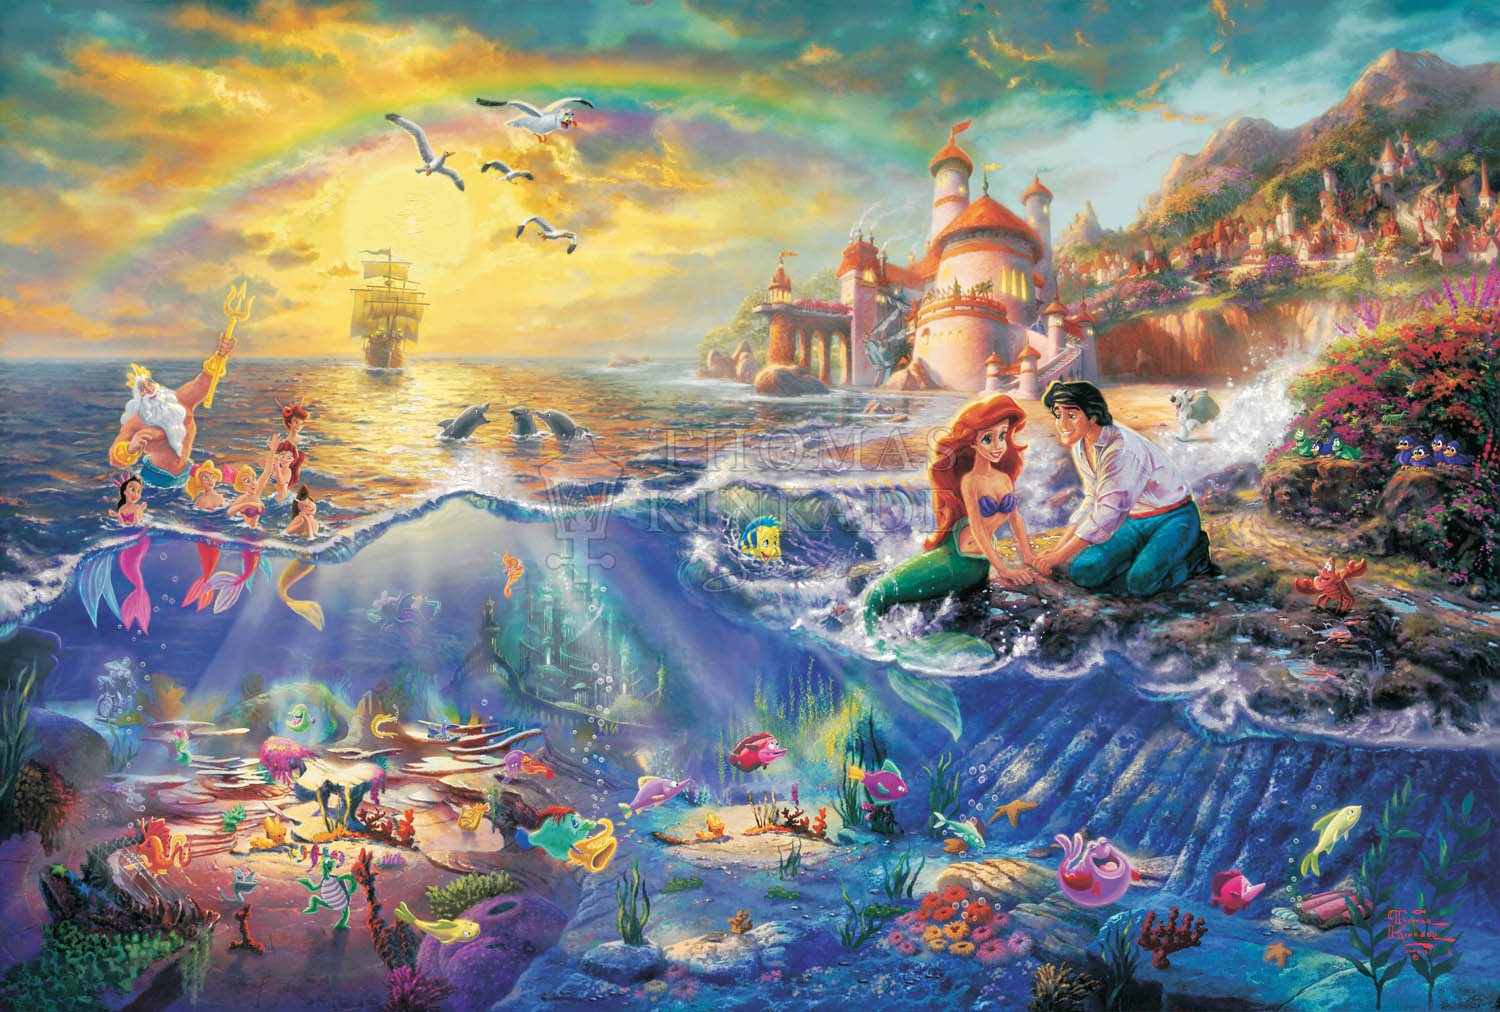 Thomas Kinkade Studios "The Little Mermaid" Limited and Open Canvas Giclee